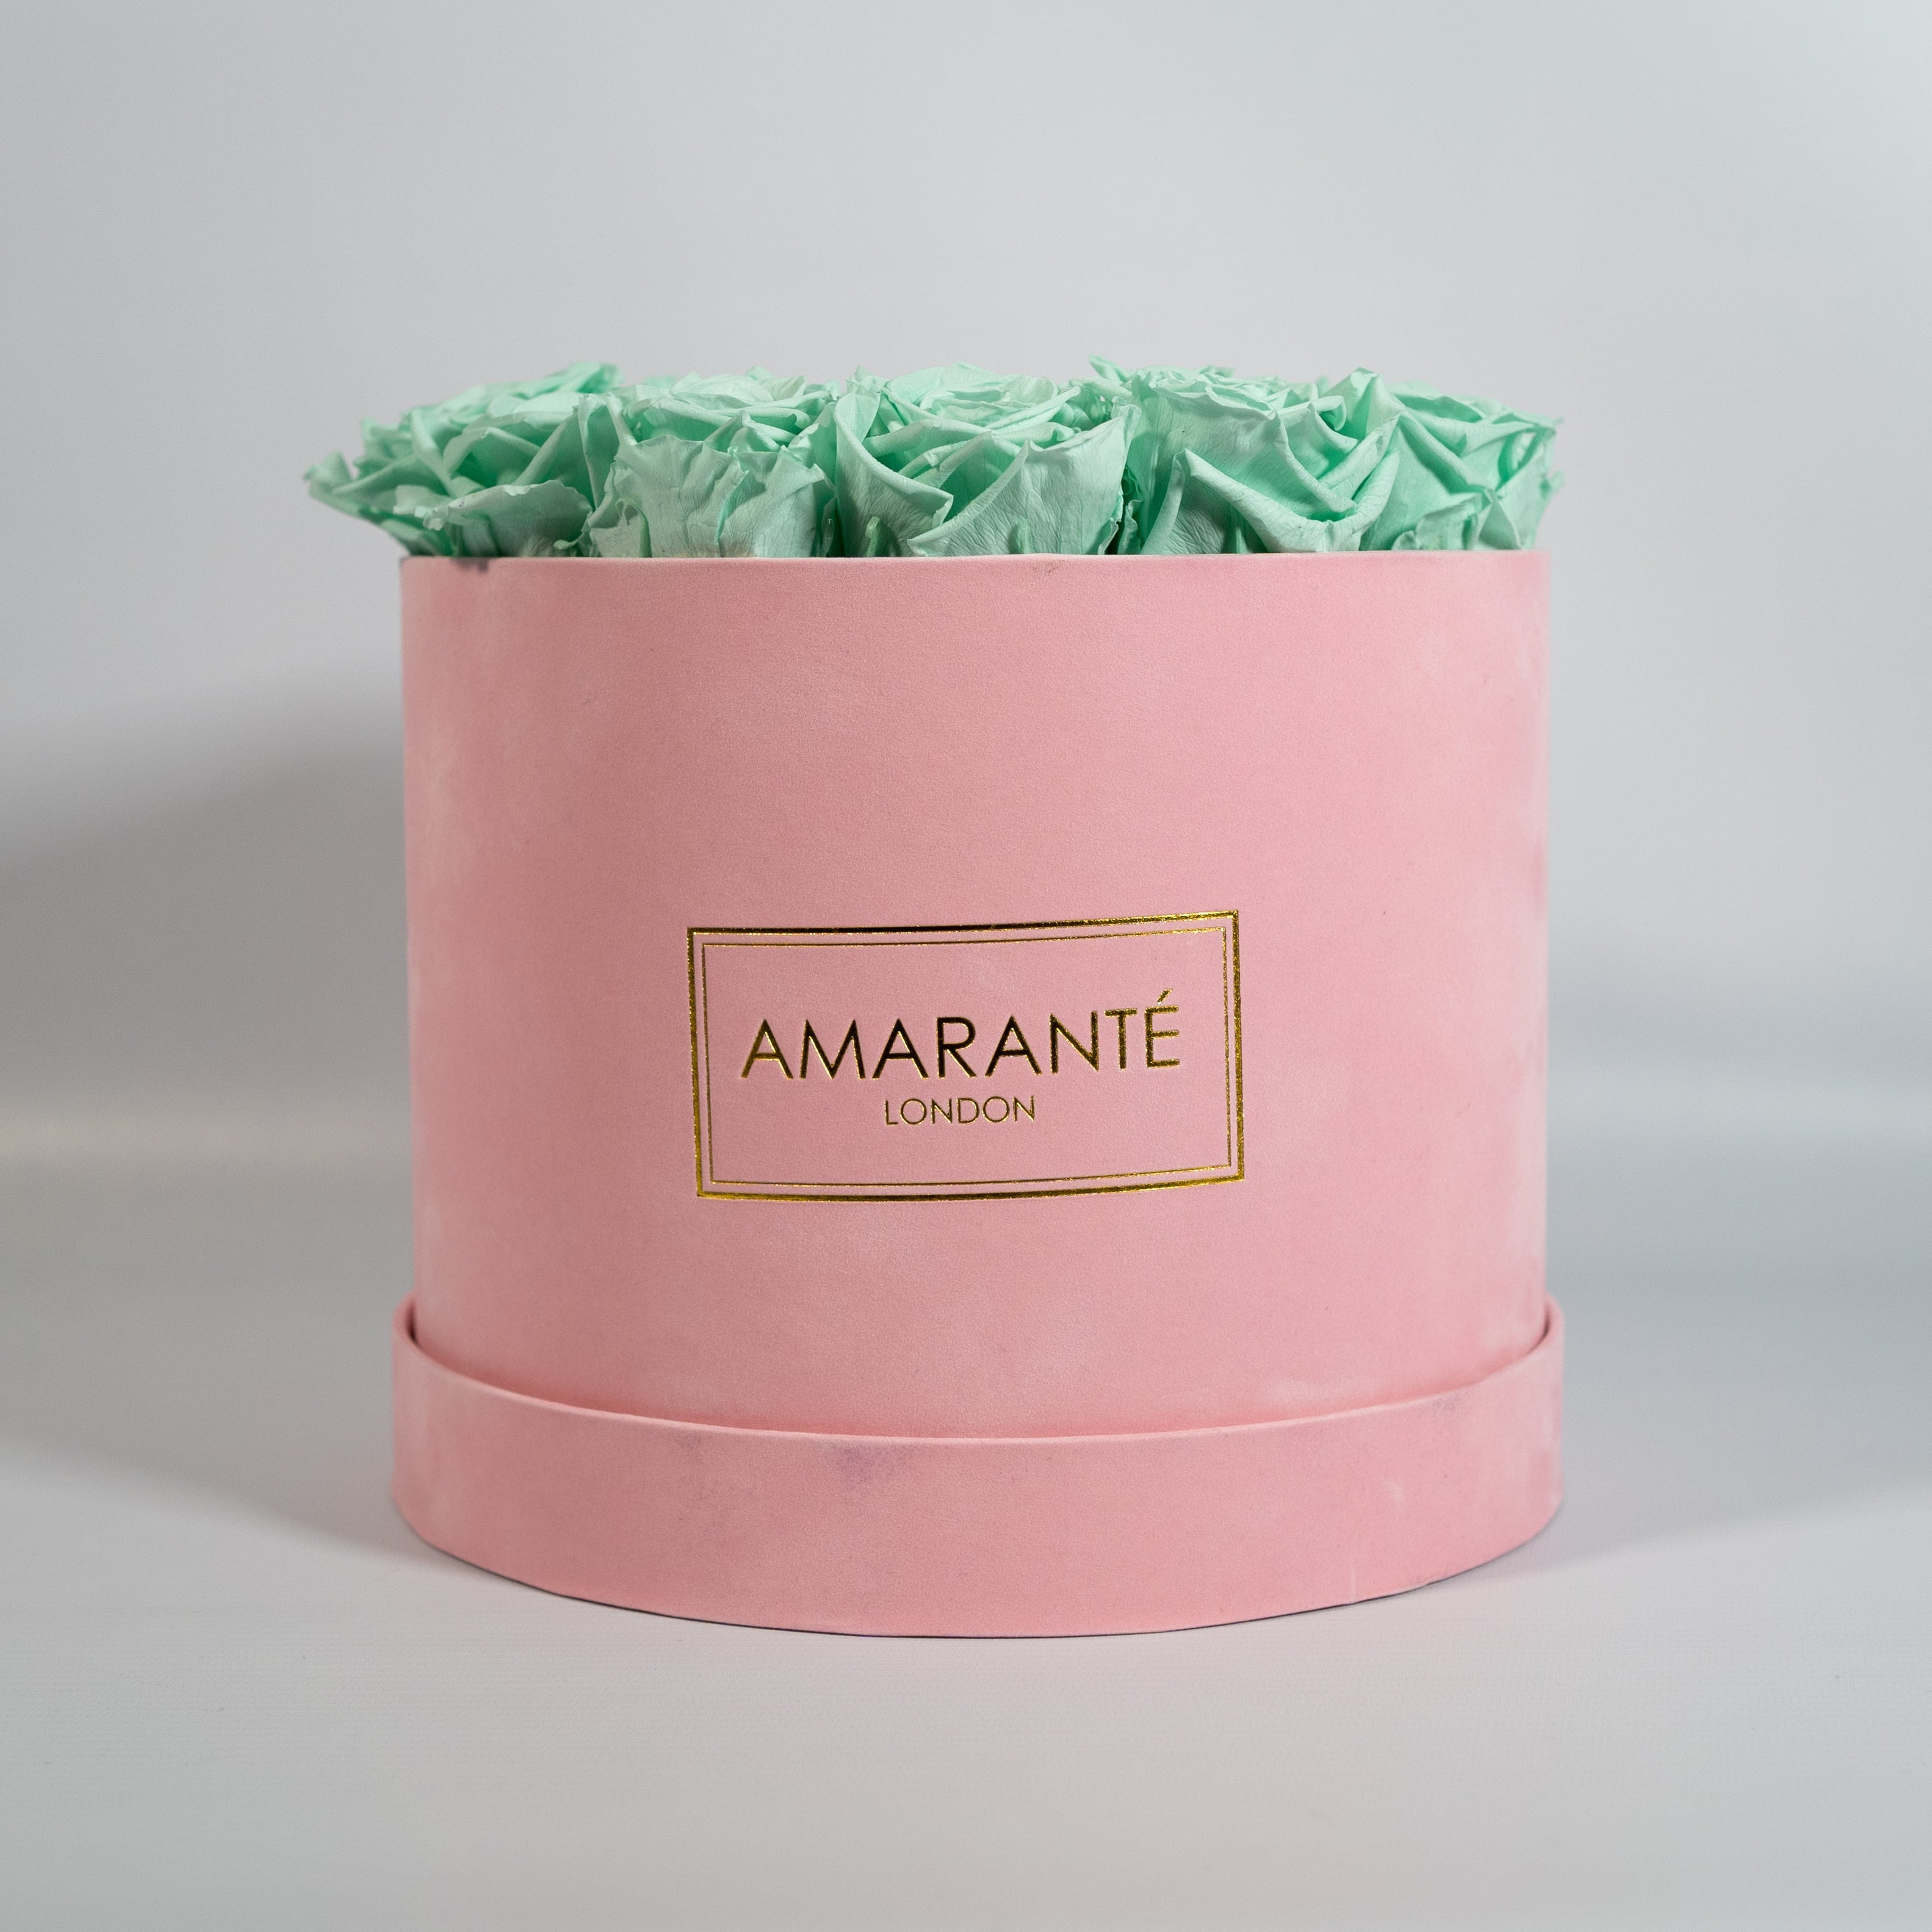 Revitalising mint green Roses featured in a delicate pink box 